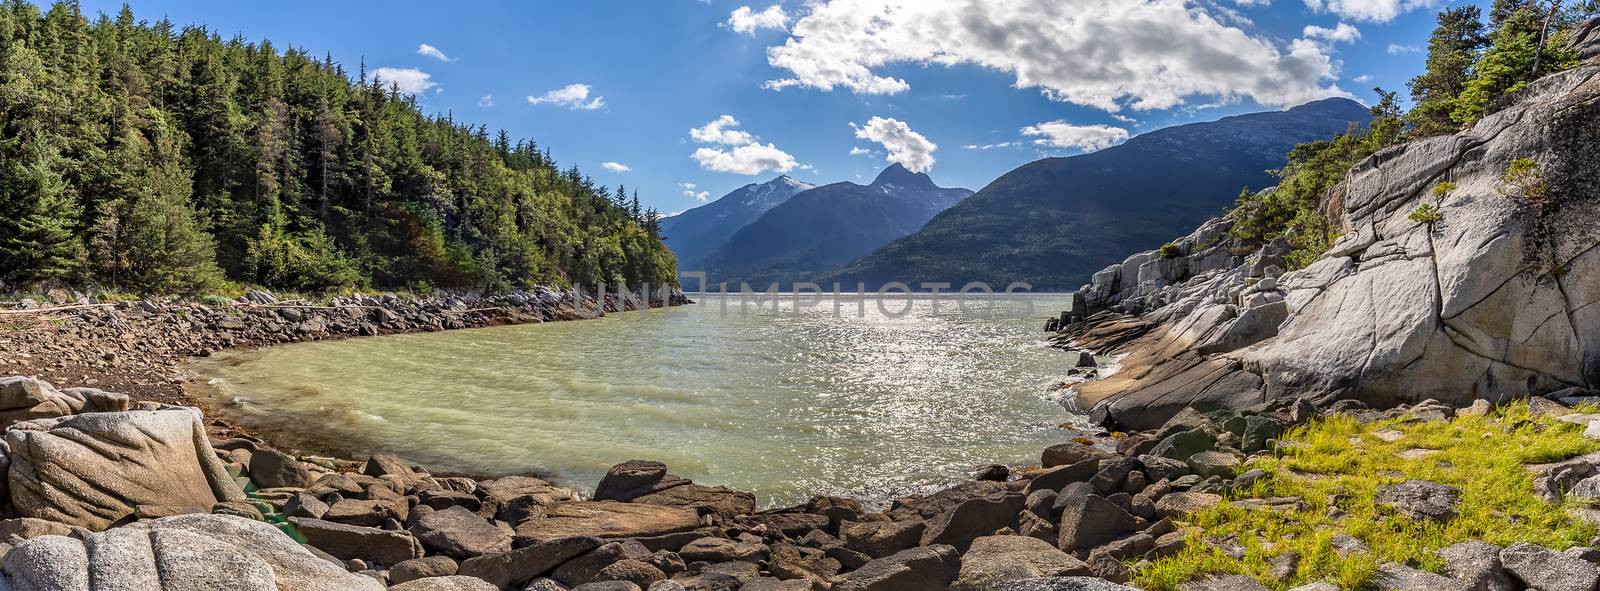 Beautiful panoramic view of Smuggler's Cove in Alaska. Mountains, forest, blue cloudy sky in the background. Rocky terrain in the foreground.